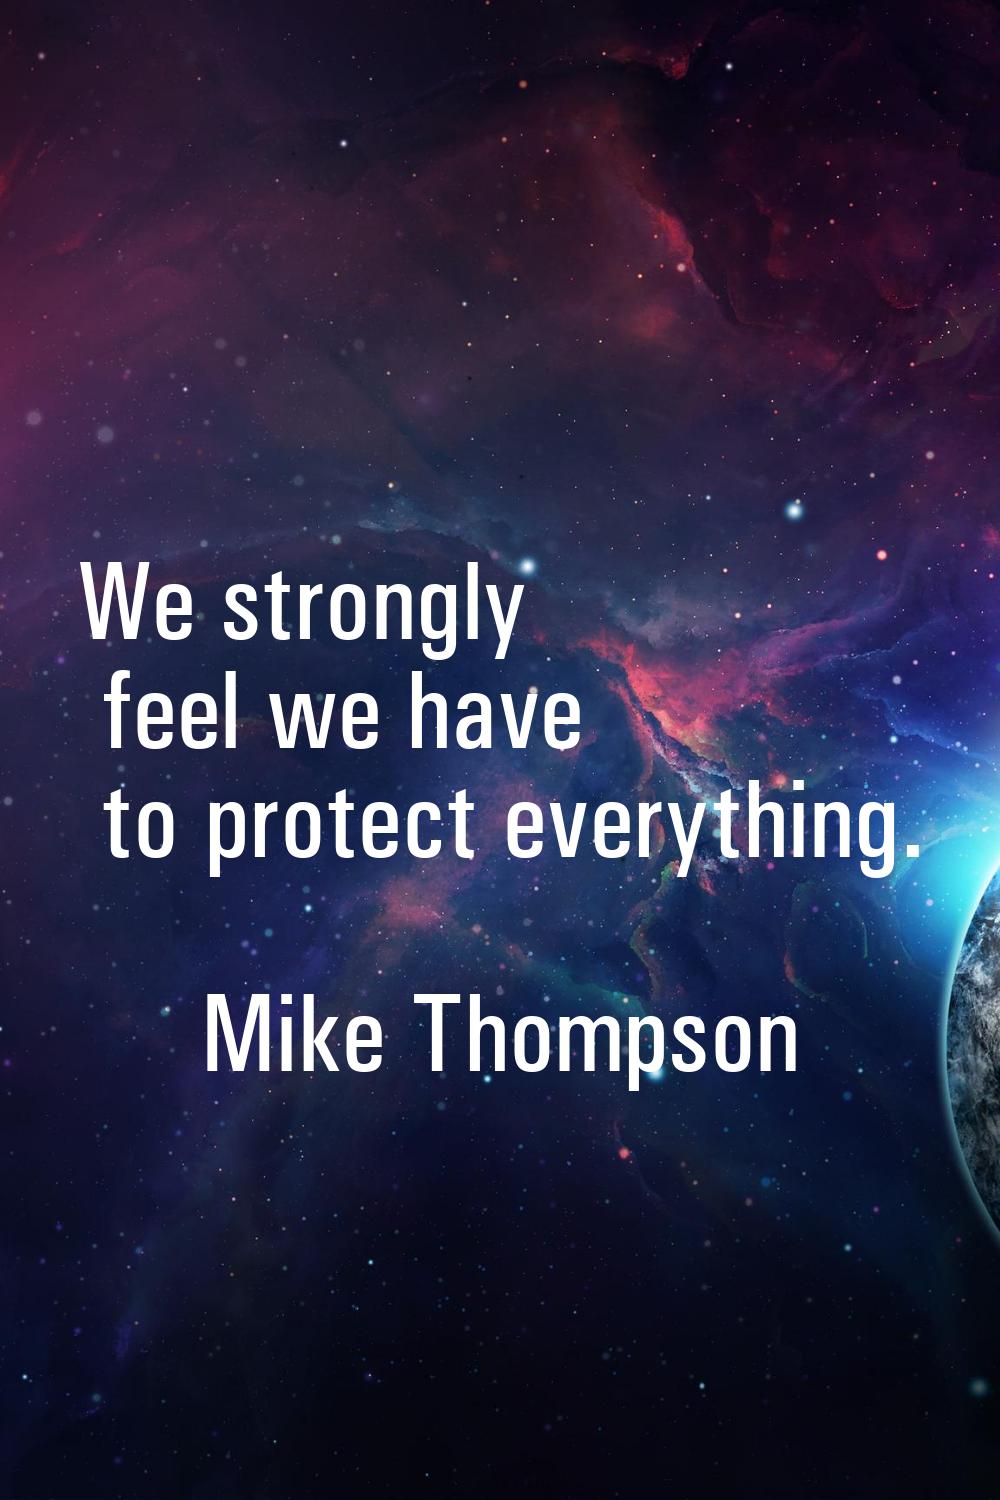 We strongly feel we have to protect everything.